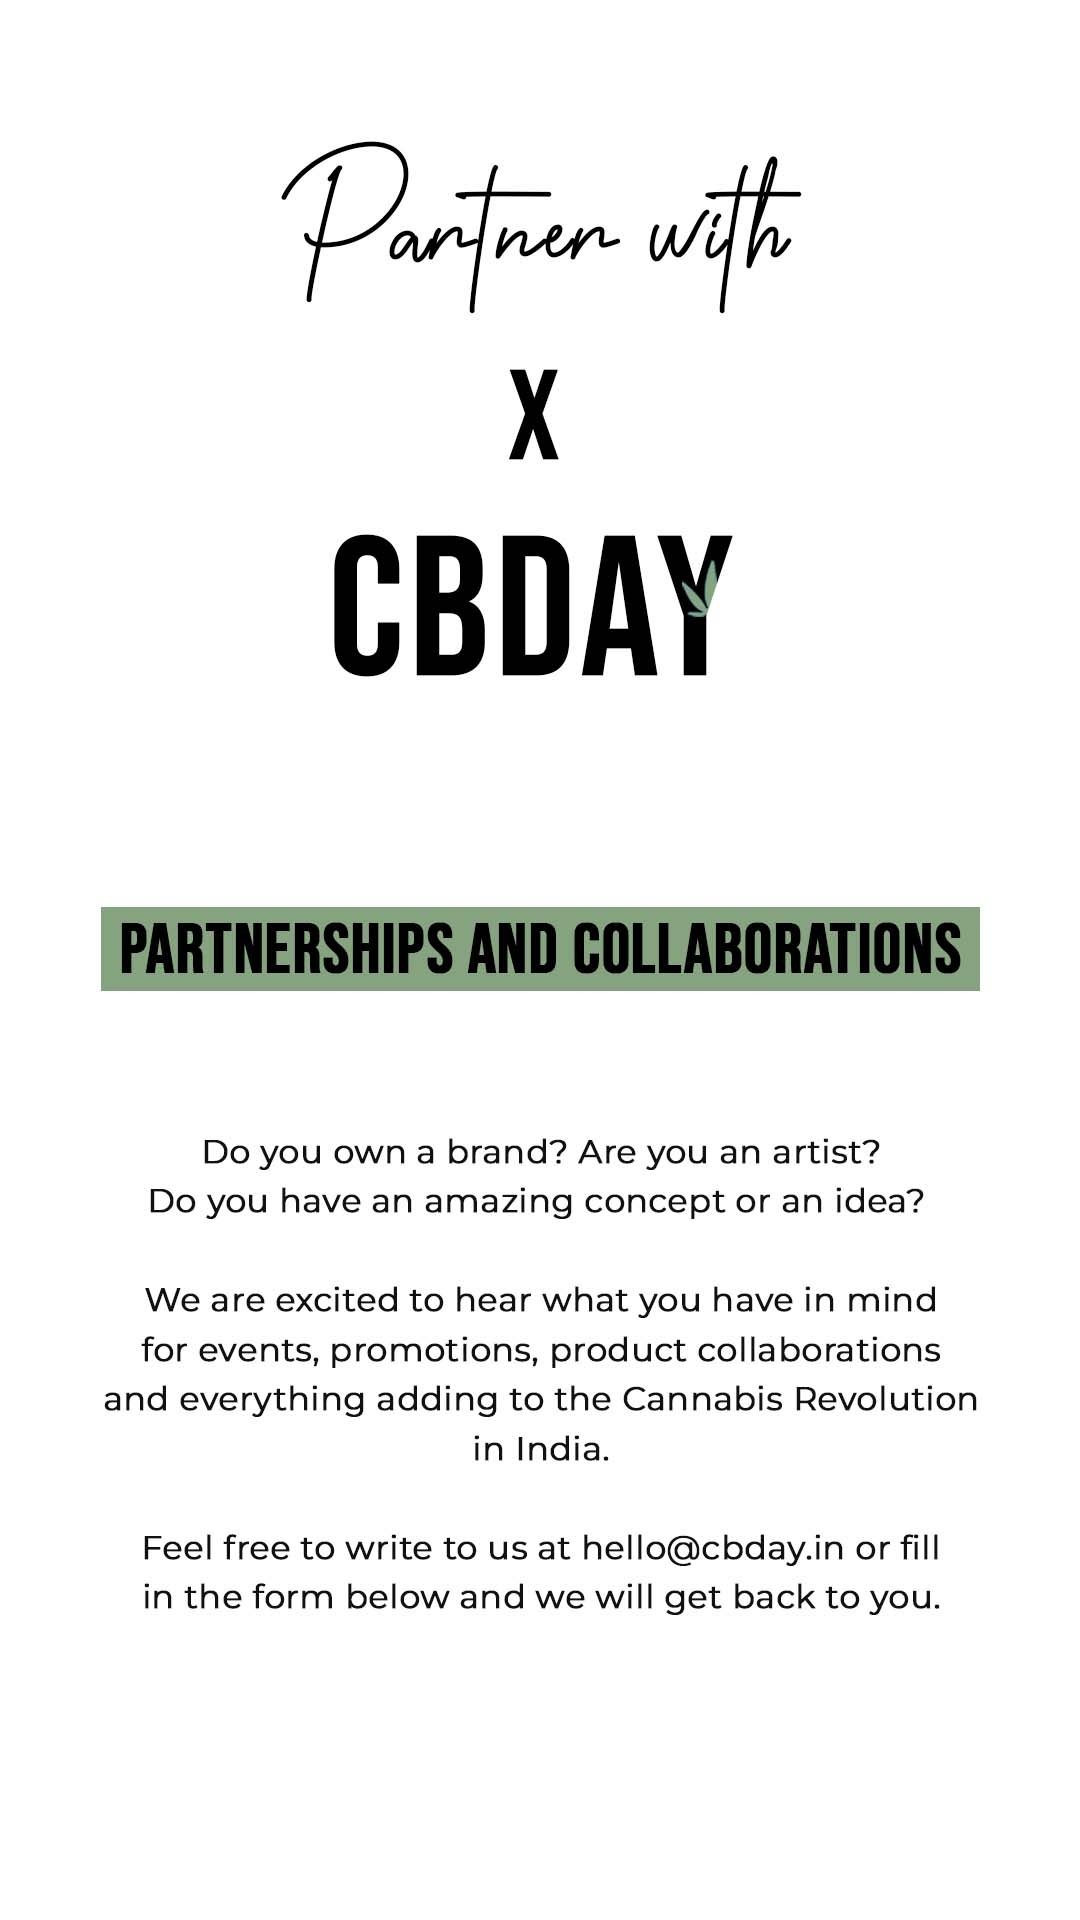 Partner With CBDAY Mobile